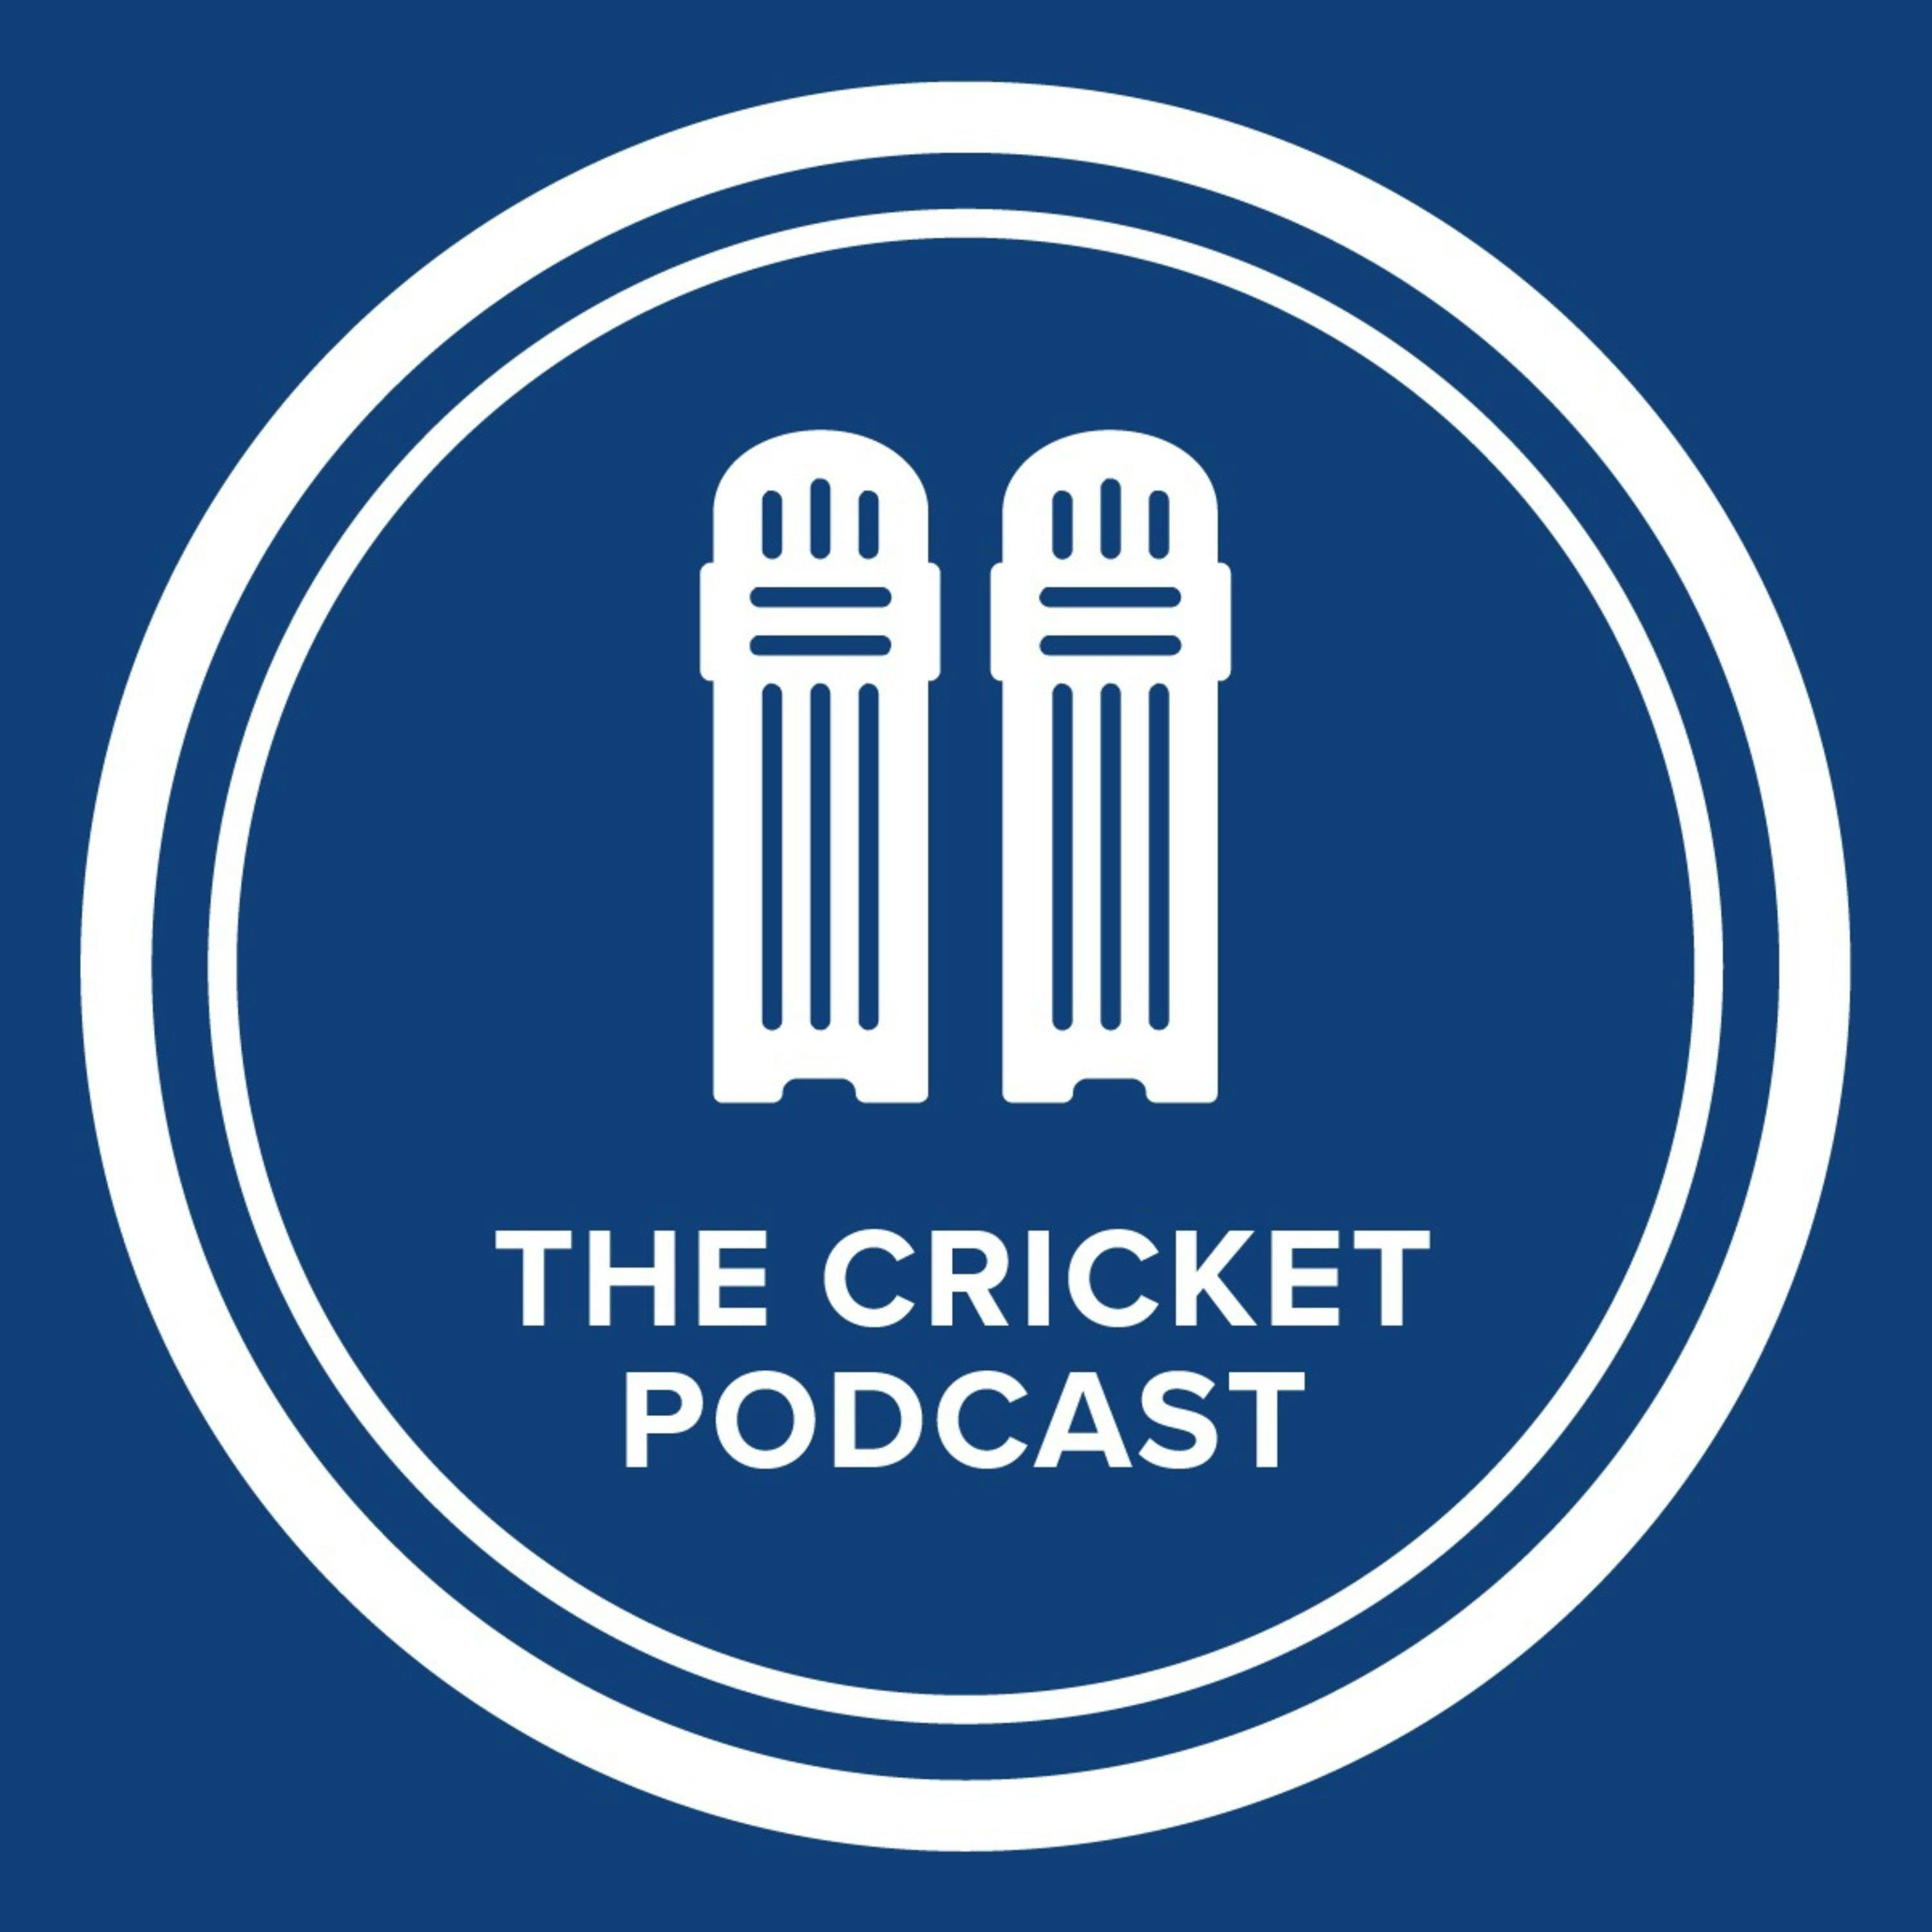 Ep 50: England Lose, Preview of the Second Test and a Chat with Tom Holland